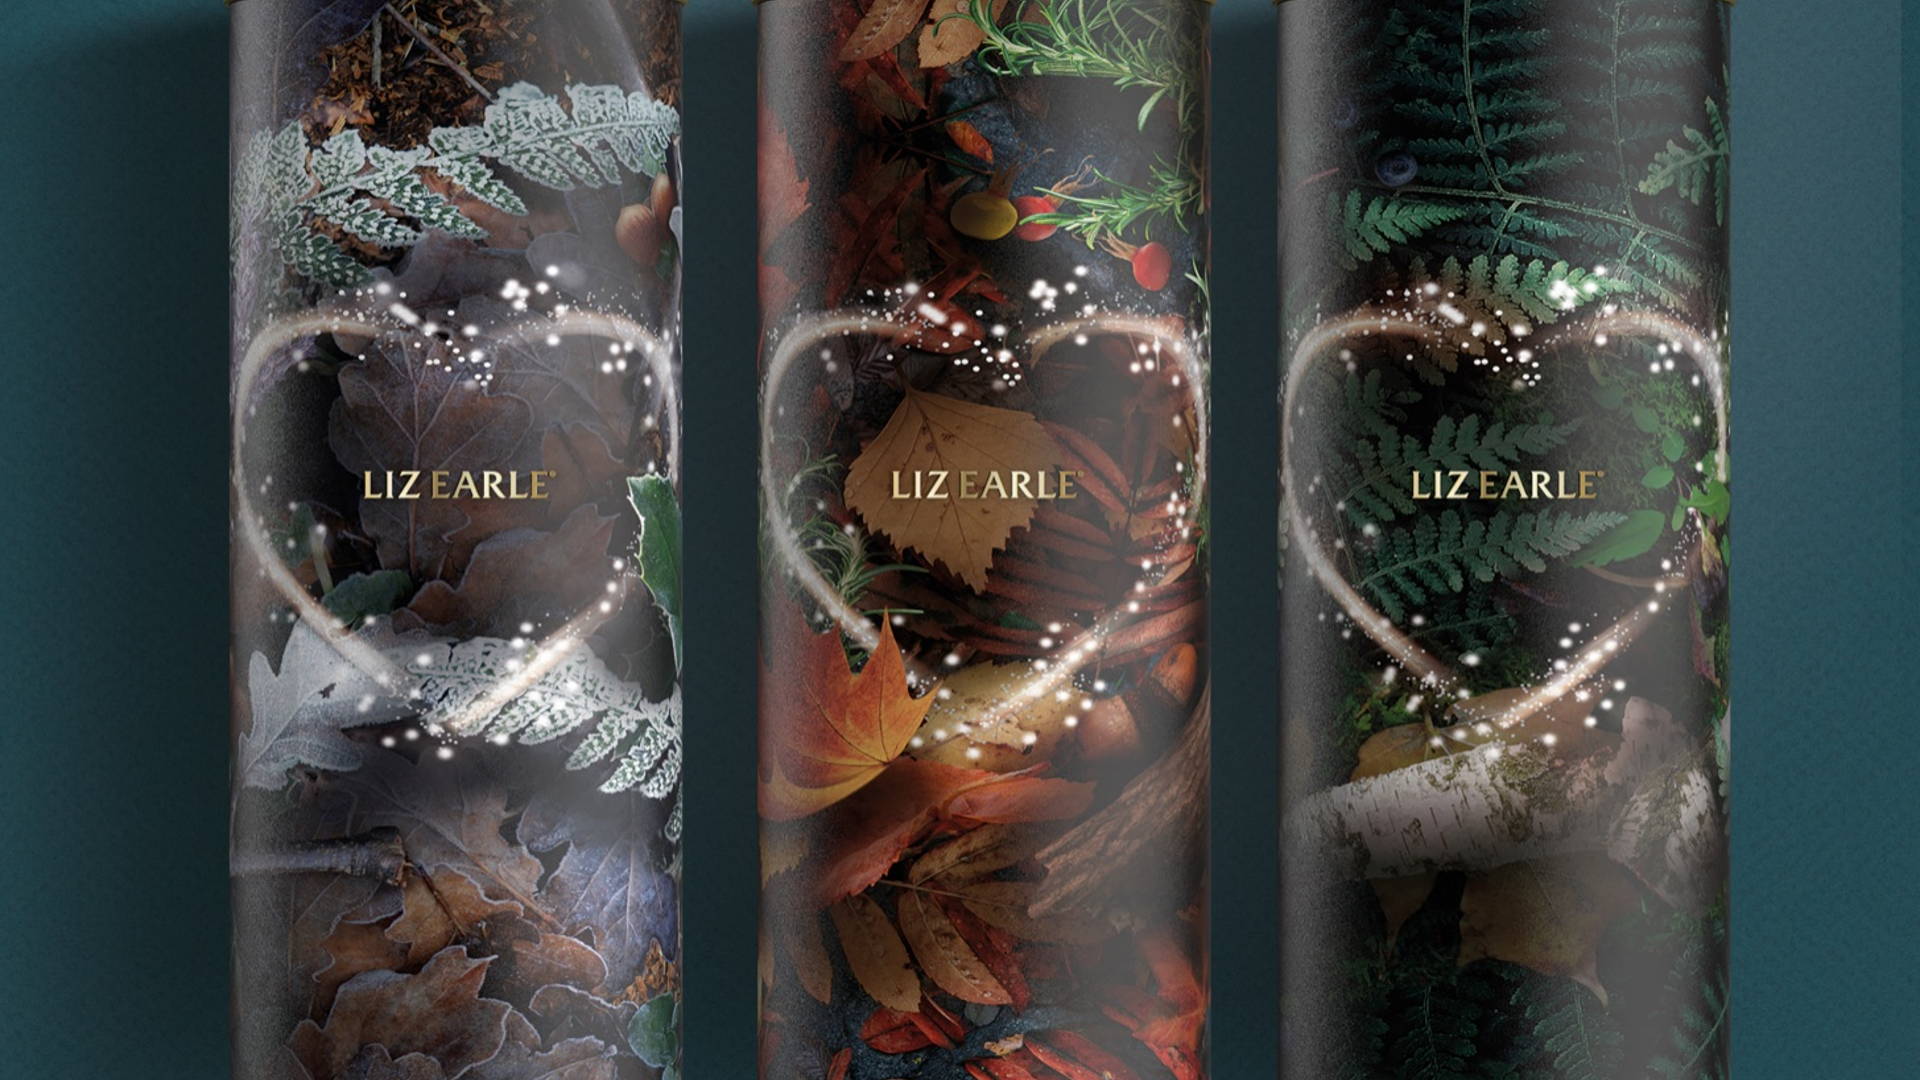 Featured image for Free The Birds Elevates The Festive Spirit For Liz Earle Beauty Co.’s Christmas Collection